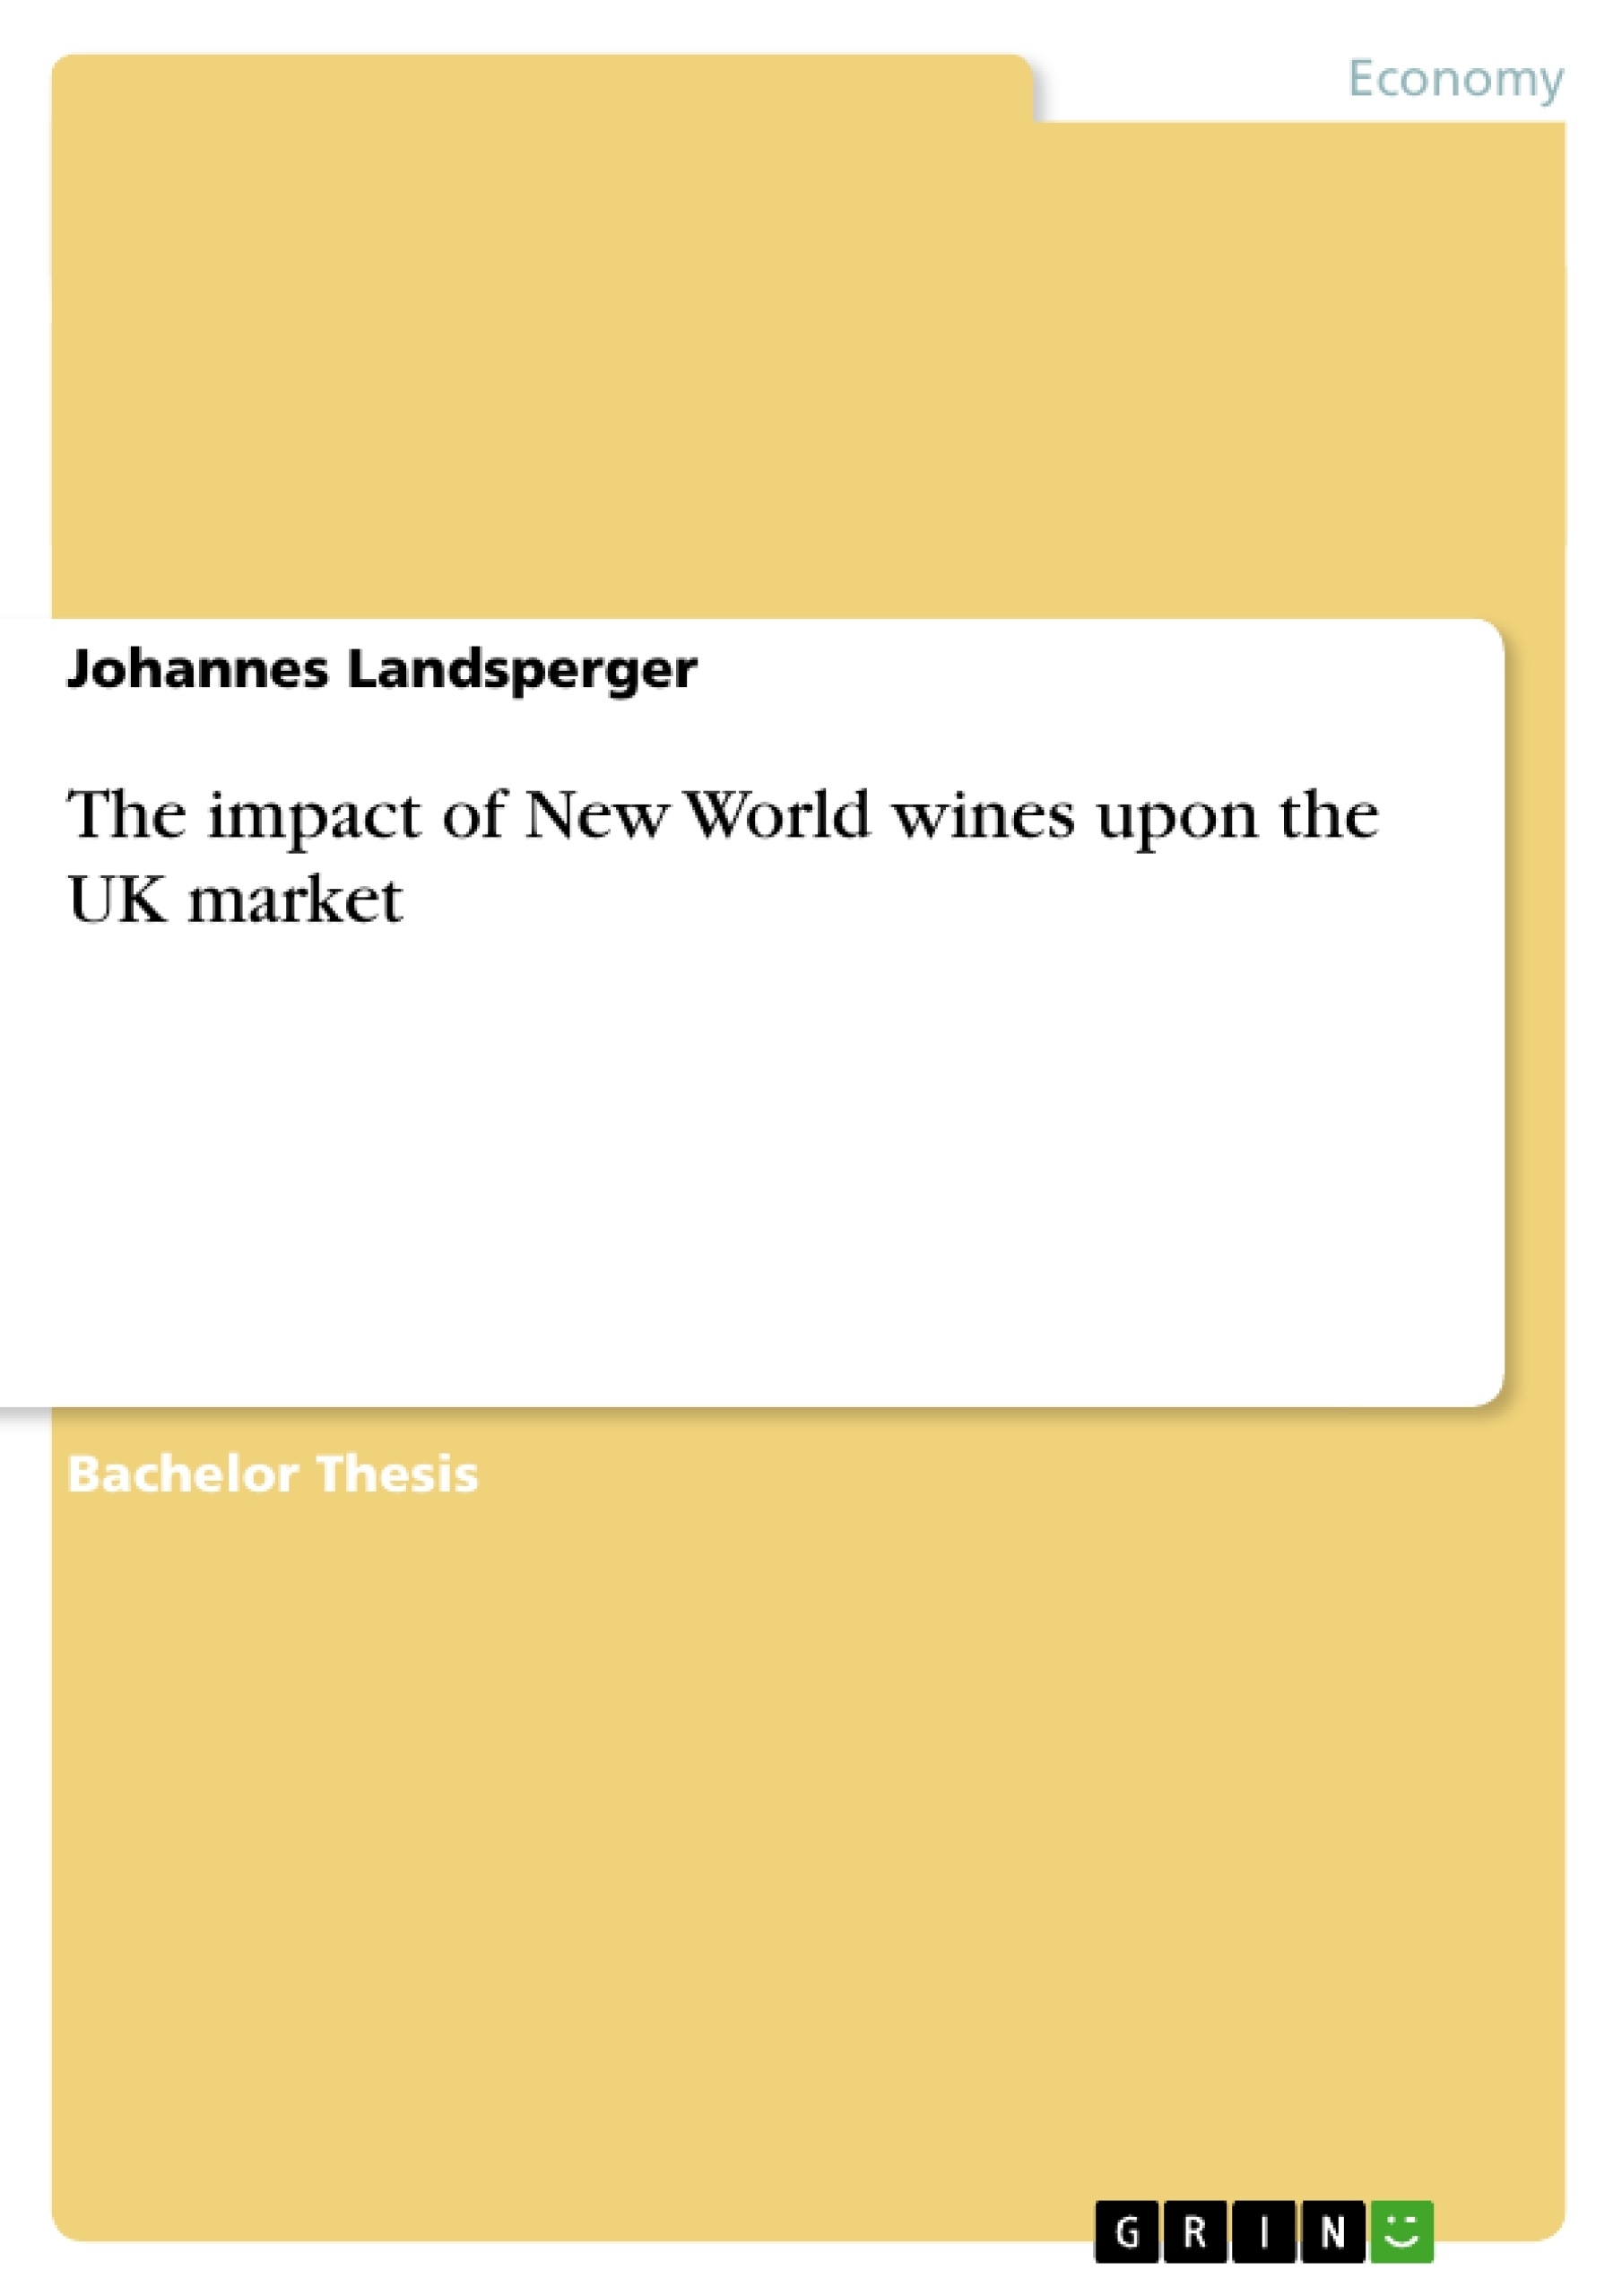 Title: The impact of New World wines upon the UK market